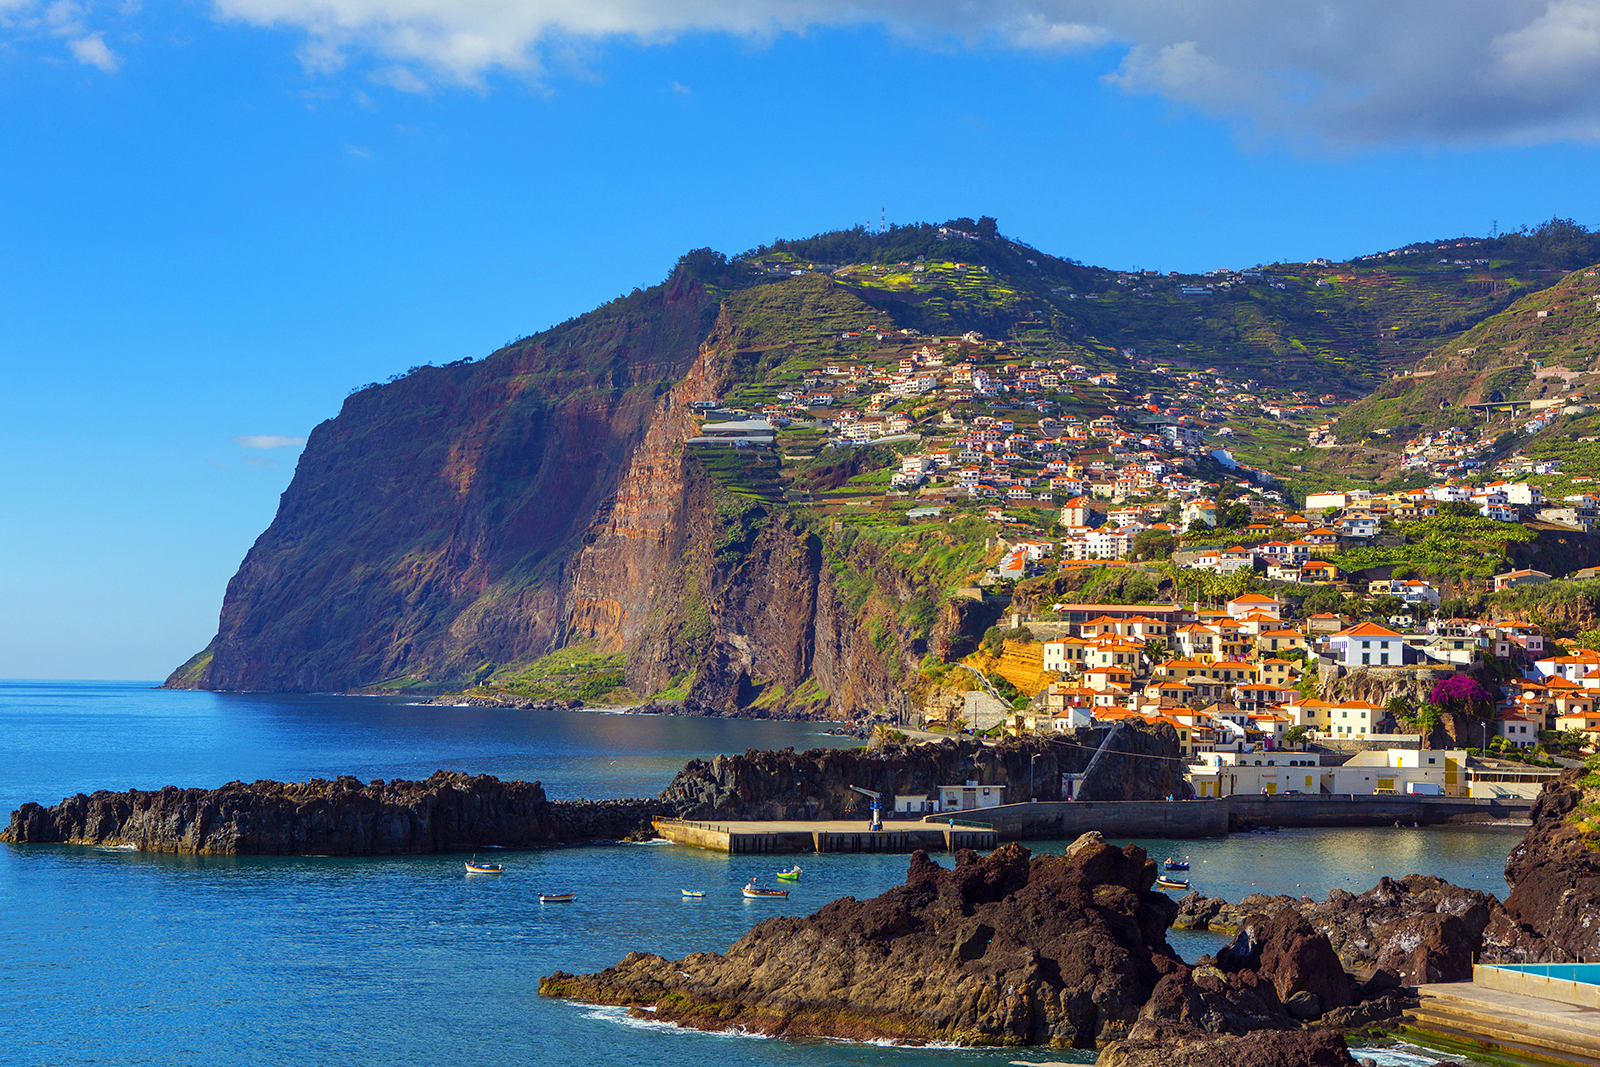 a picture of a beach town in Madeira, Portugal